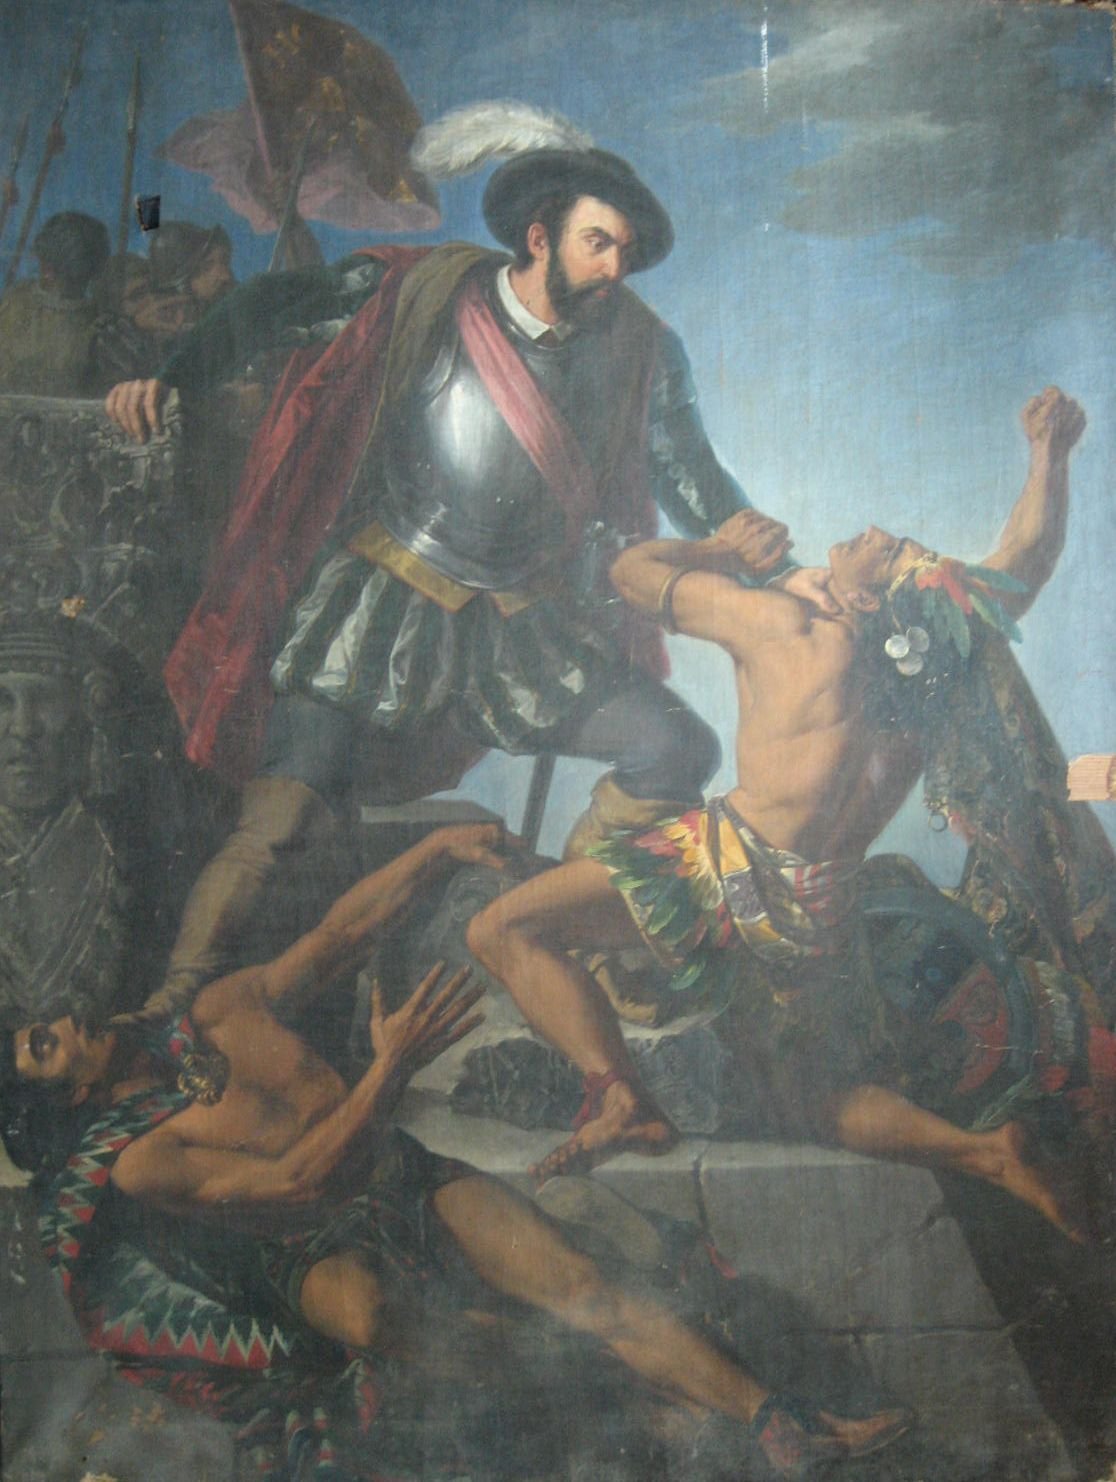 Spain honours Hernán Cortés to anger of Native Americans